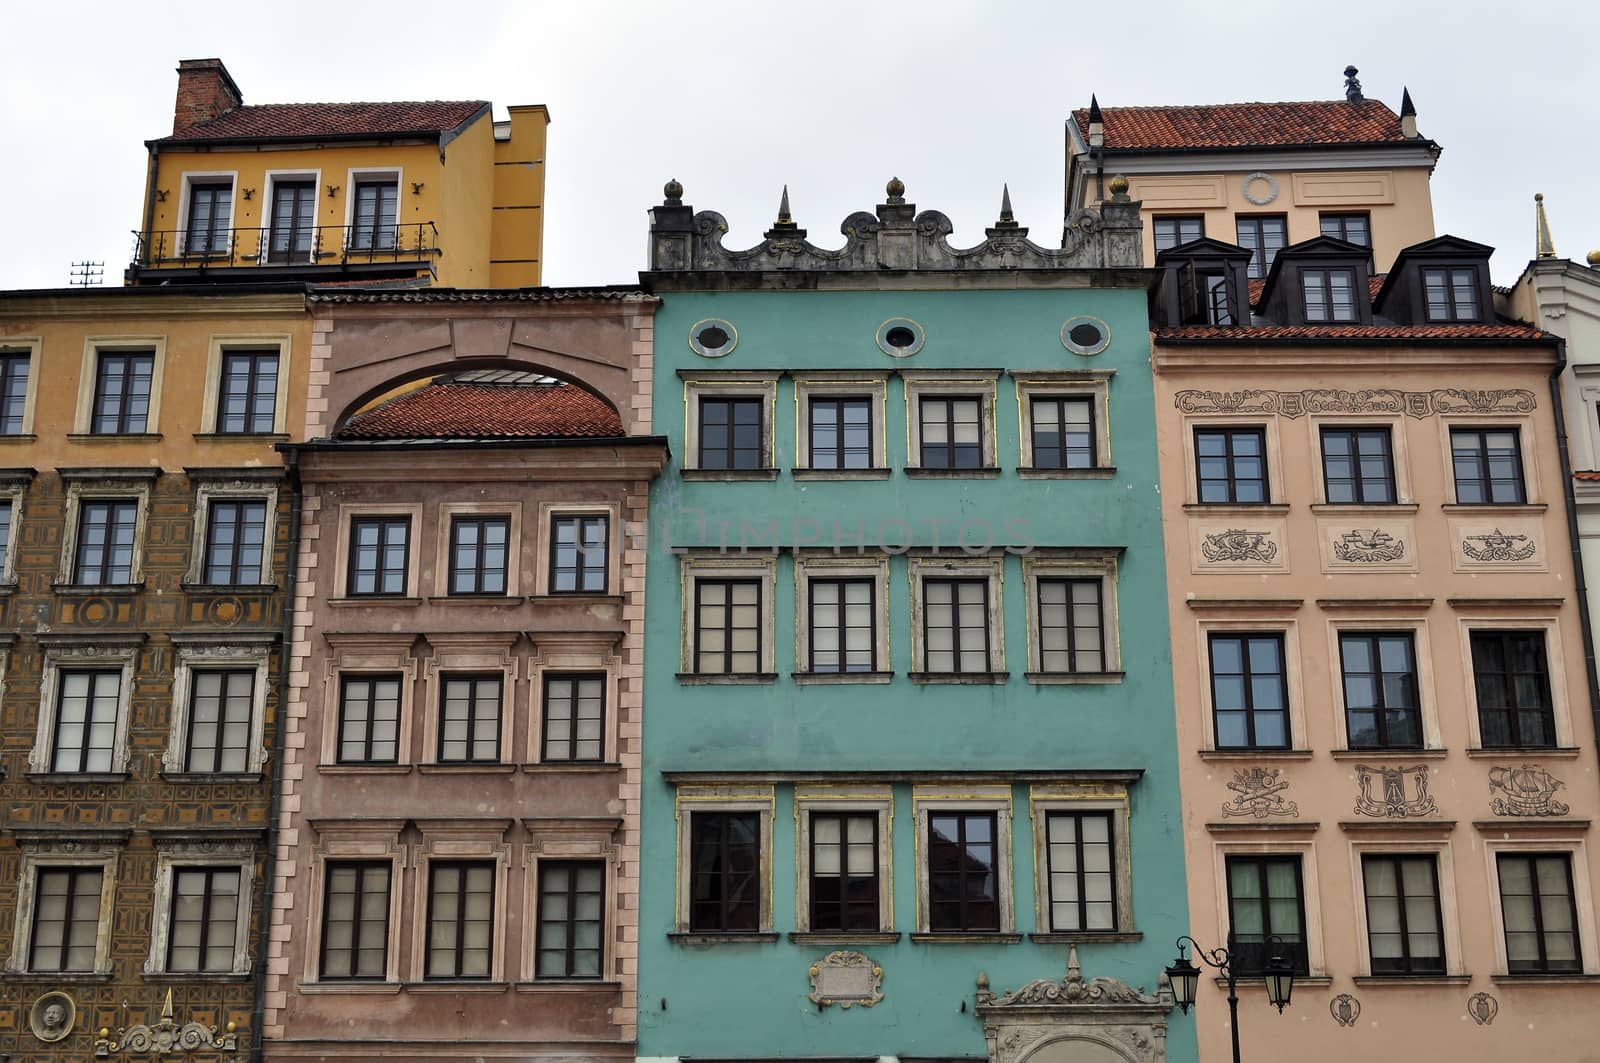 Buildings in the Old Town of Warsaw, Poland.